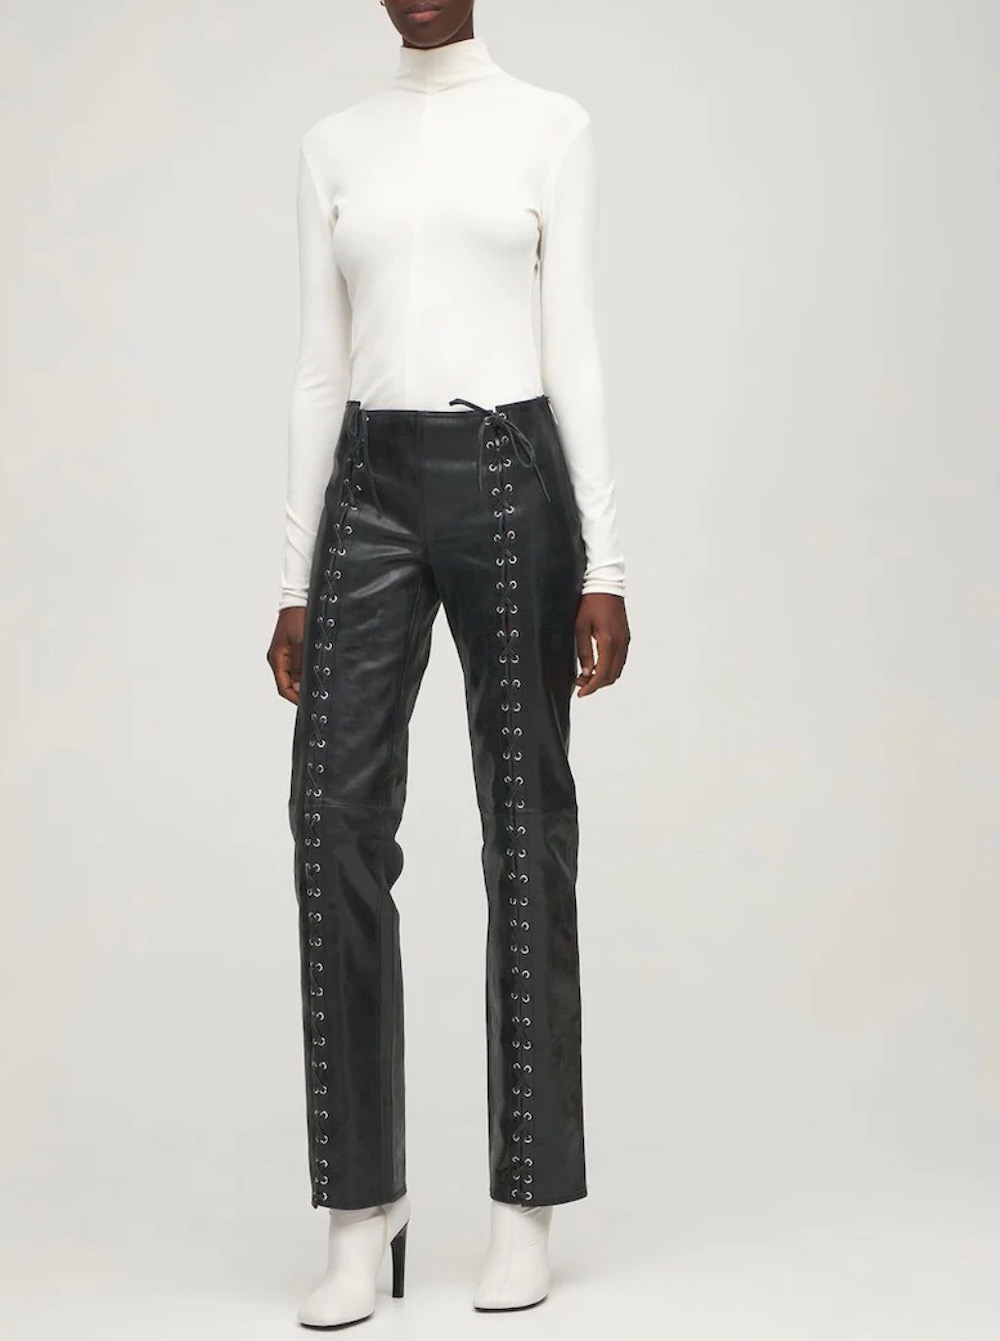 Leather Pants 2021 Update #1